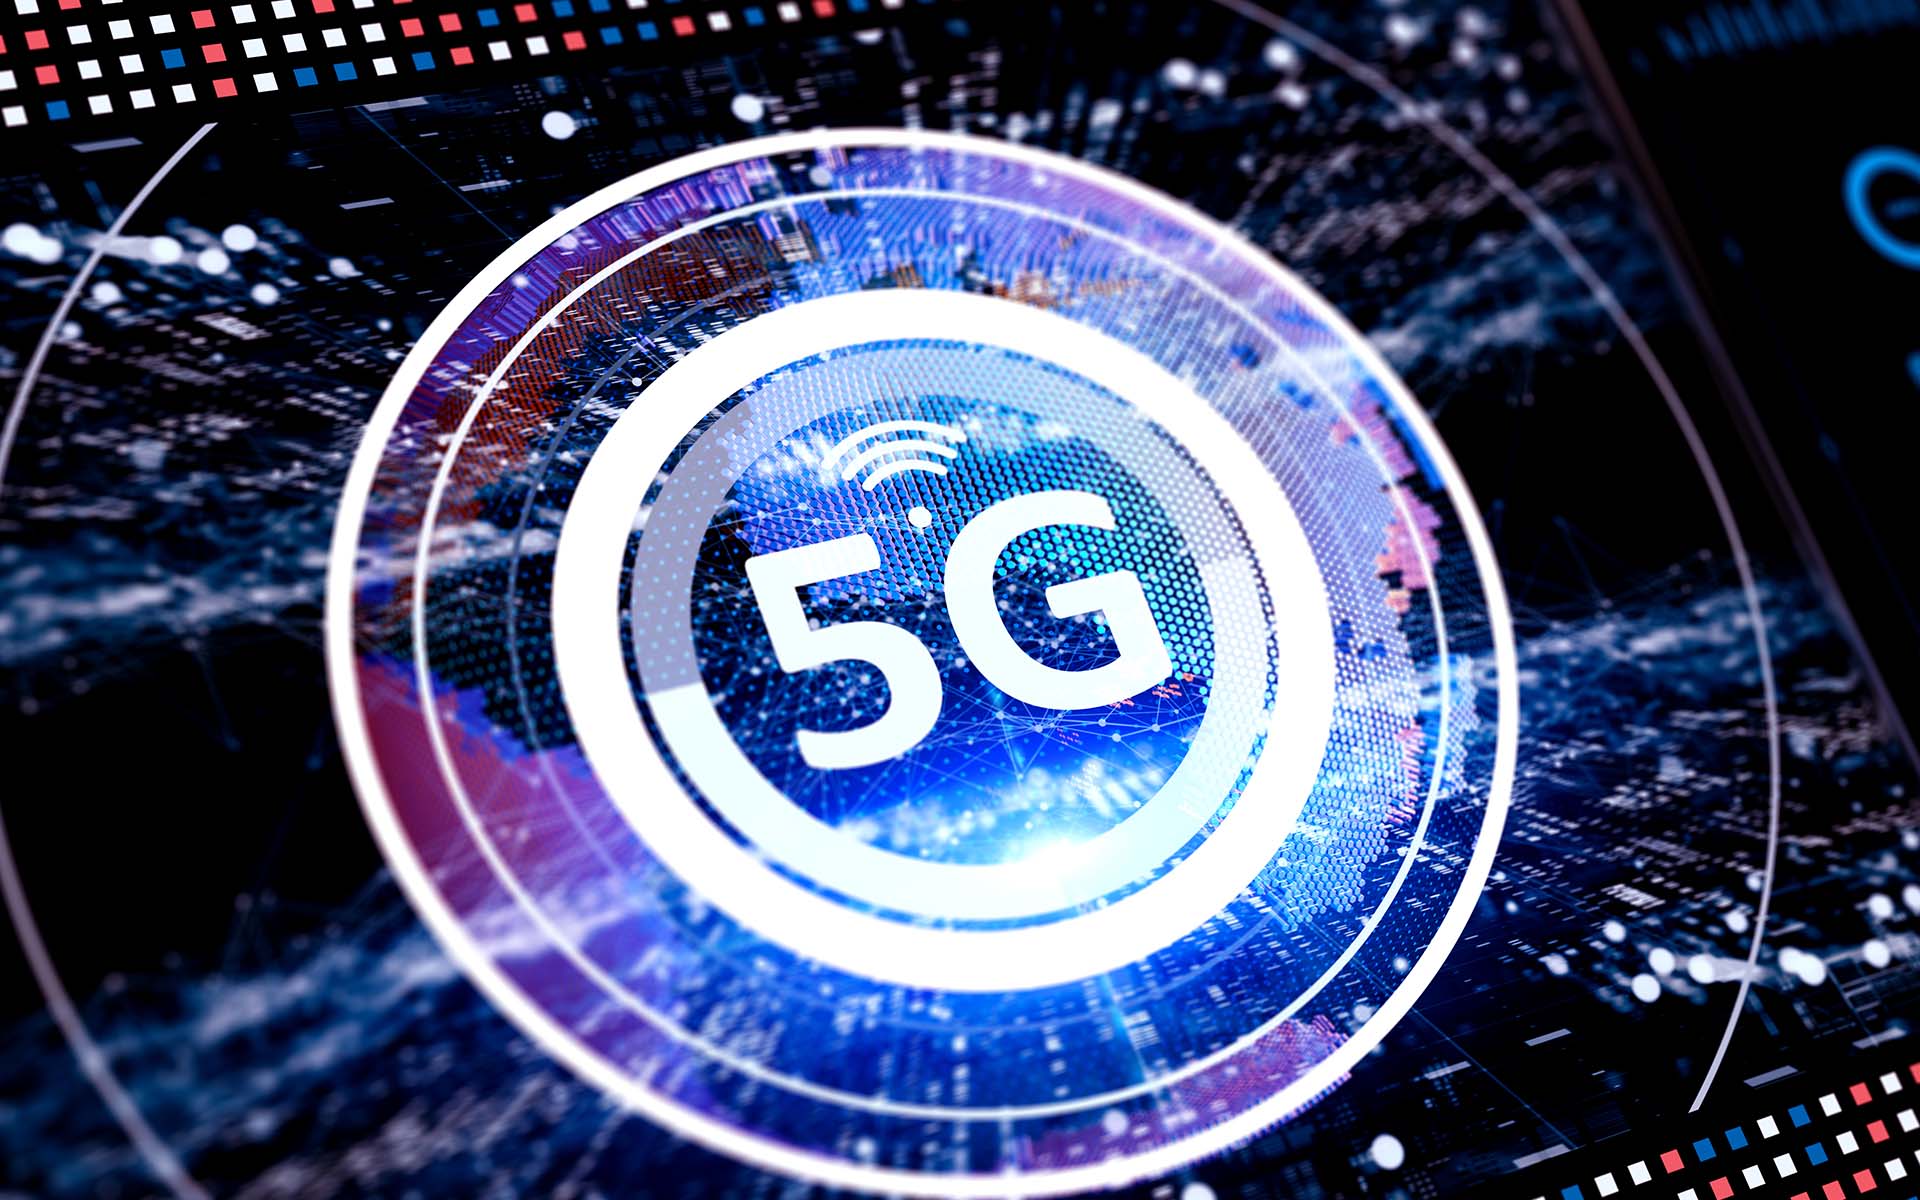 The Battle of 5G Titans: Standalone (SA) and Non-standalone (NSA) 5G Deployment Models